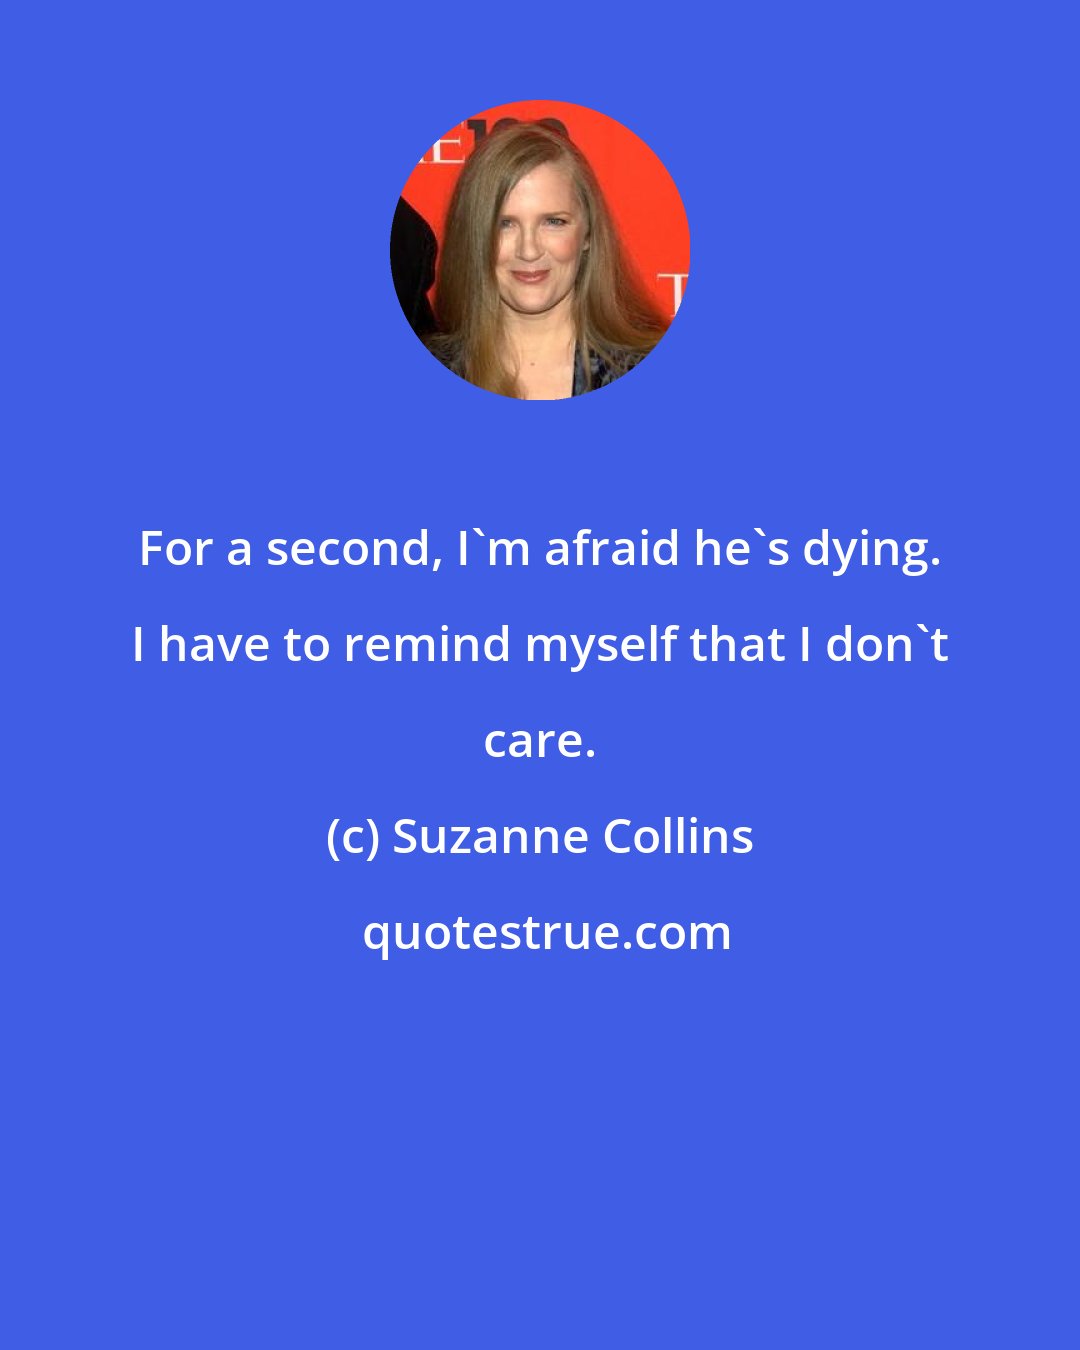 Suzanne Collins: For a second, I'm afraid he's dying. I have to remind myself that I don't care.